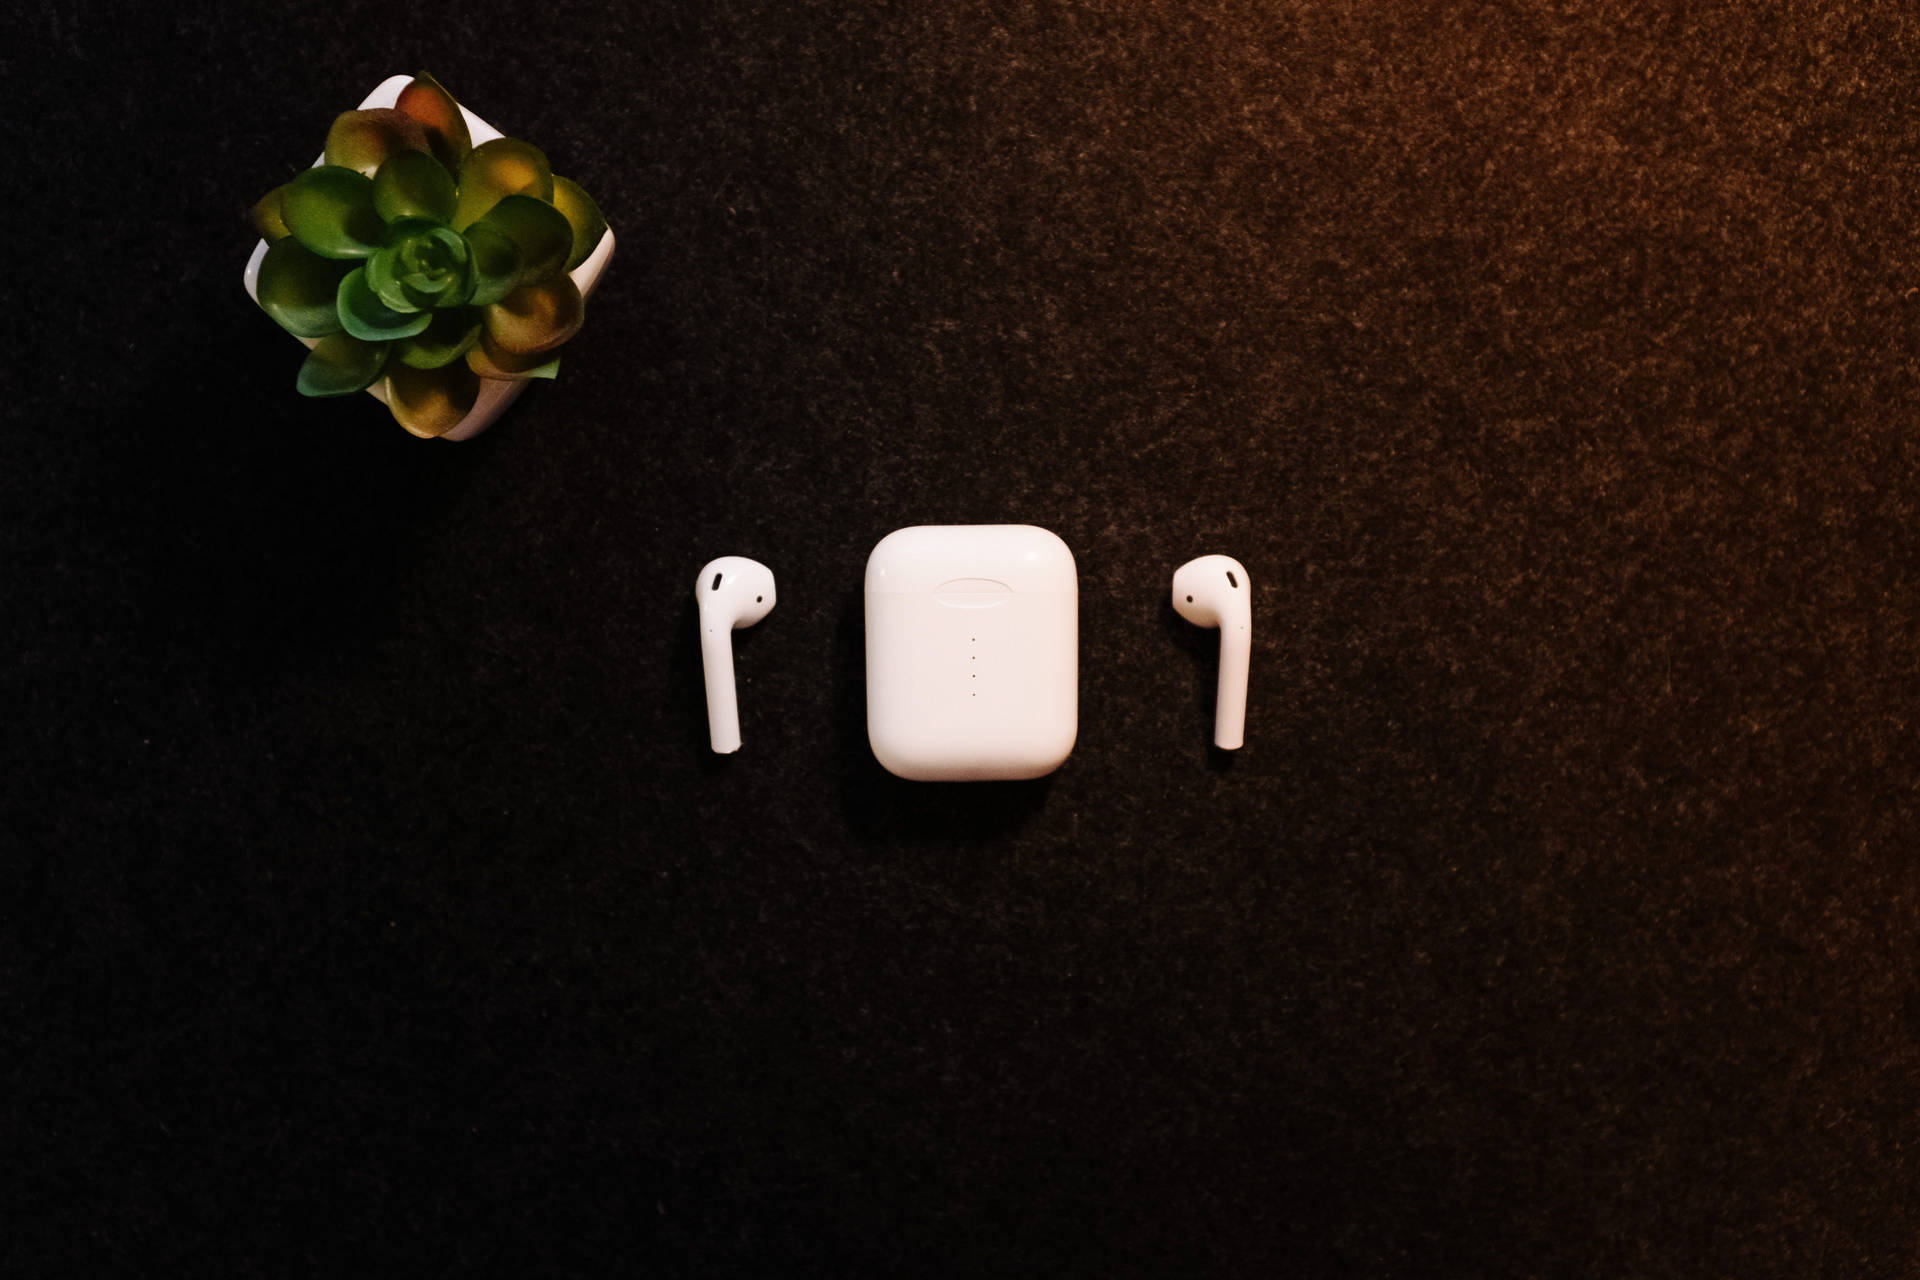 Apple Airpods with Chic Succulents Wallpaper